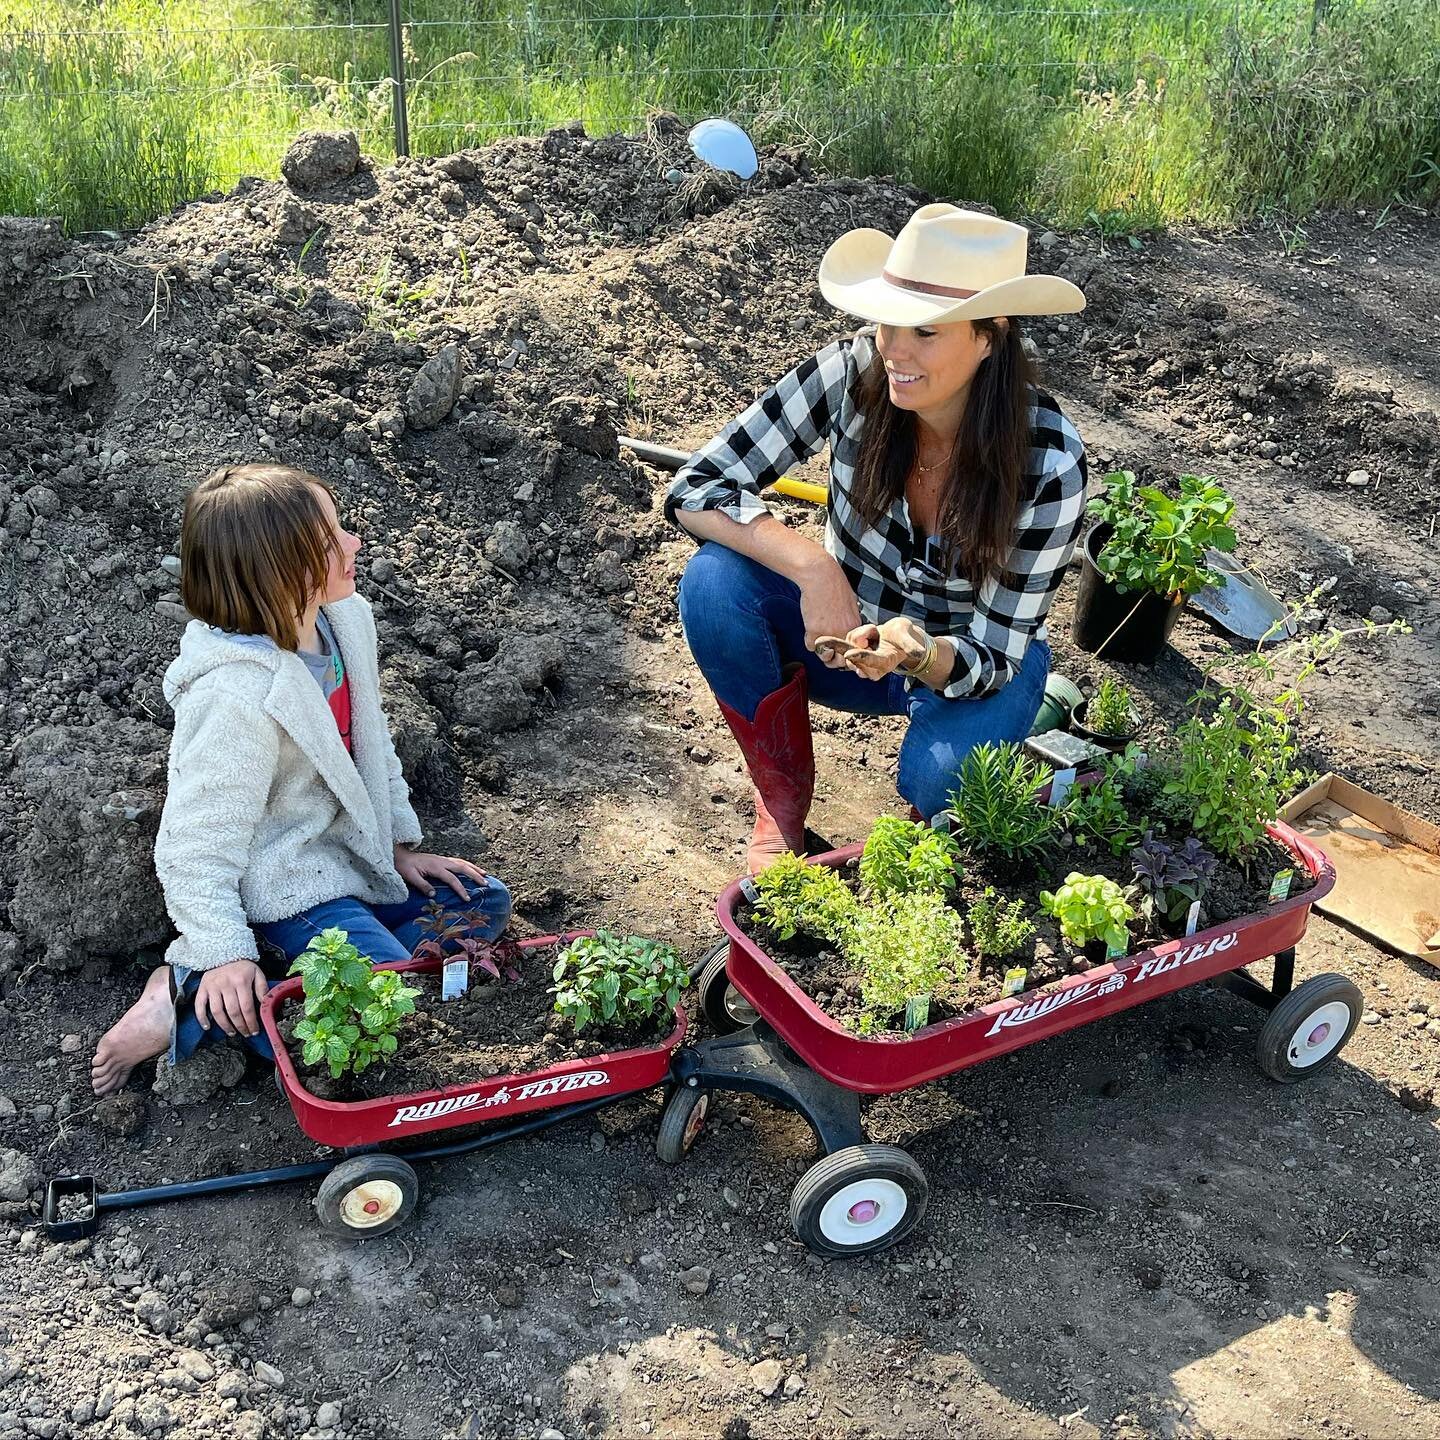 Tess and I filmed a few M5 Ranch School videos this morning in between cookbook shots! To celebrate summer and give a great option for families to have a fun place to learn ranch and farm skills from any home in the world...

⭐️...we are offering a s